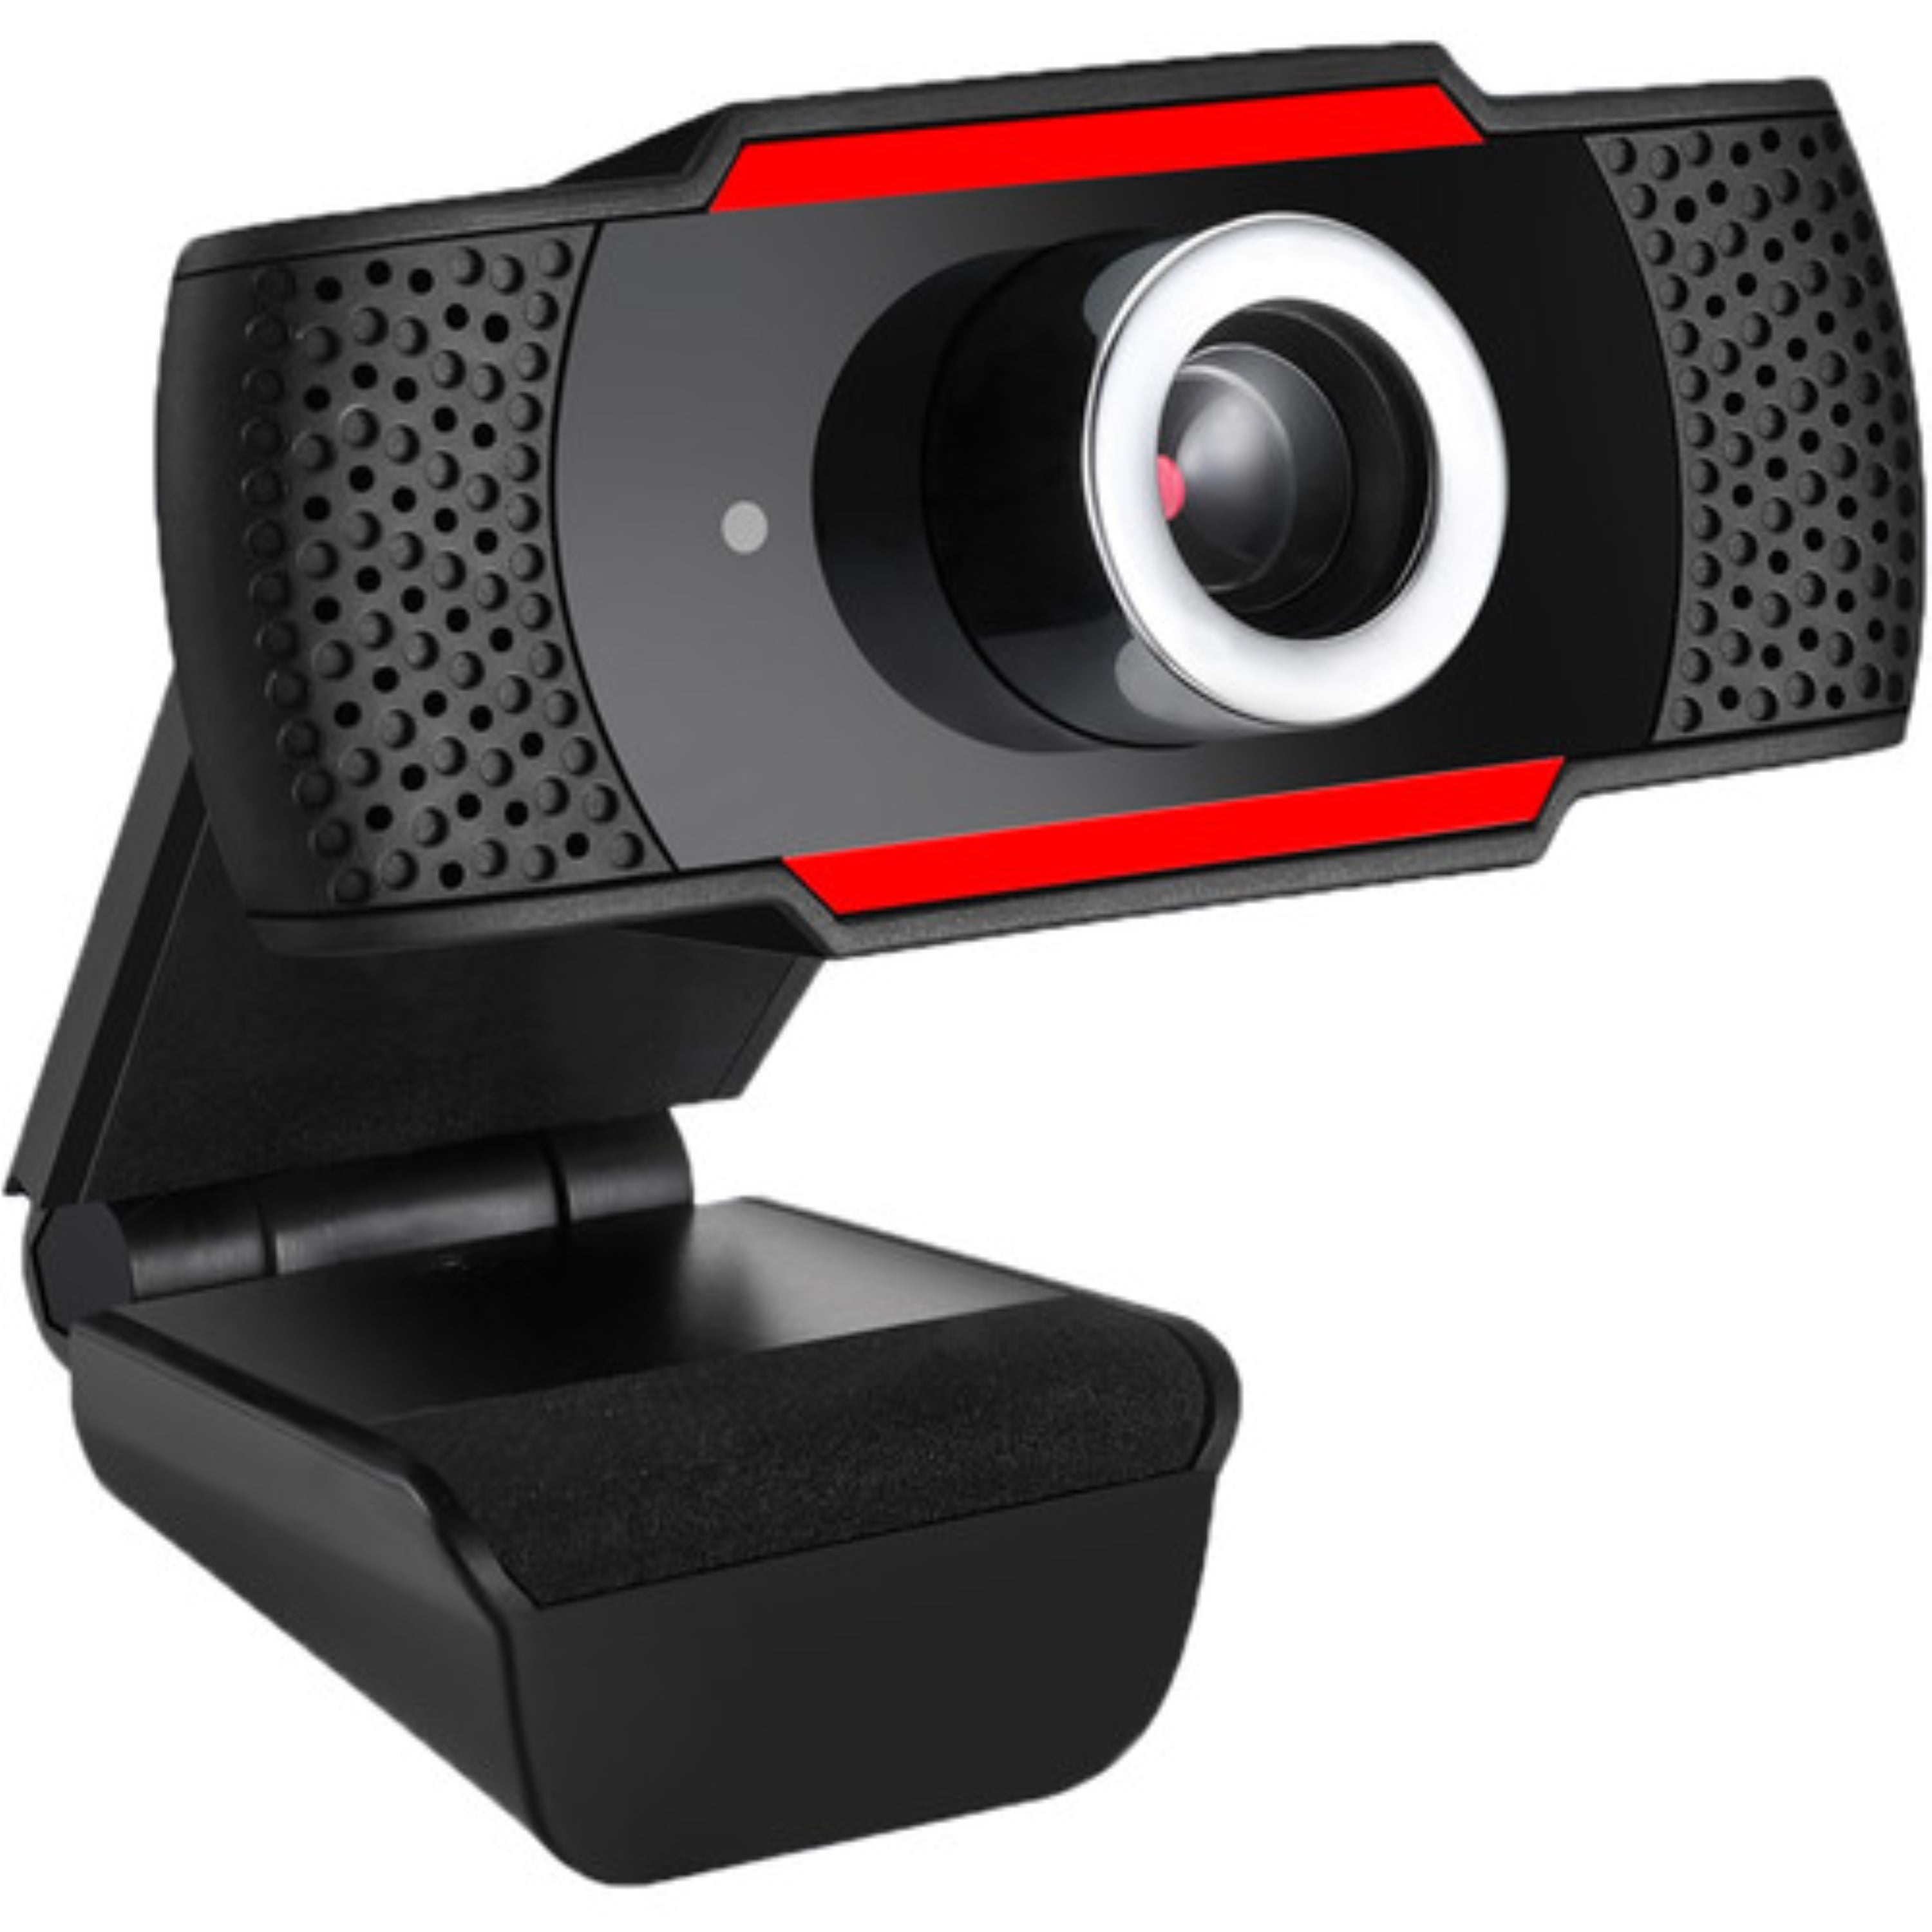 Picture of Adesso CYBERTRACK H3 720P 1.3 Megapixel Auto Focus Webcam with Build in Microphone